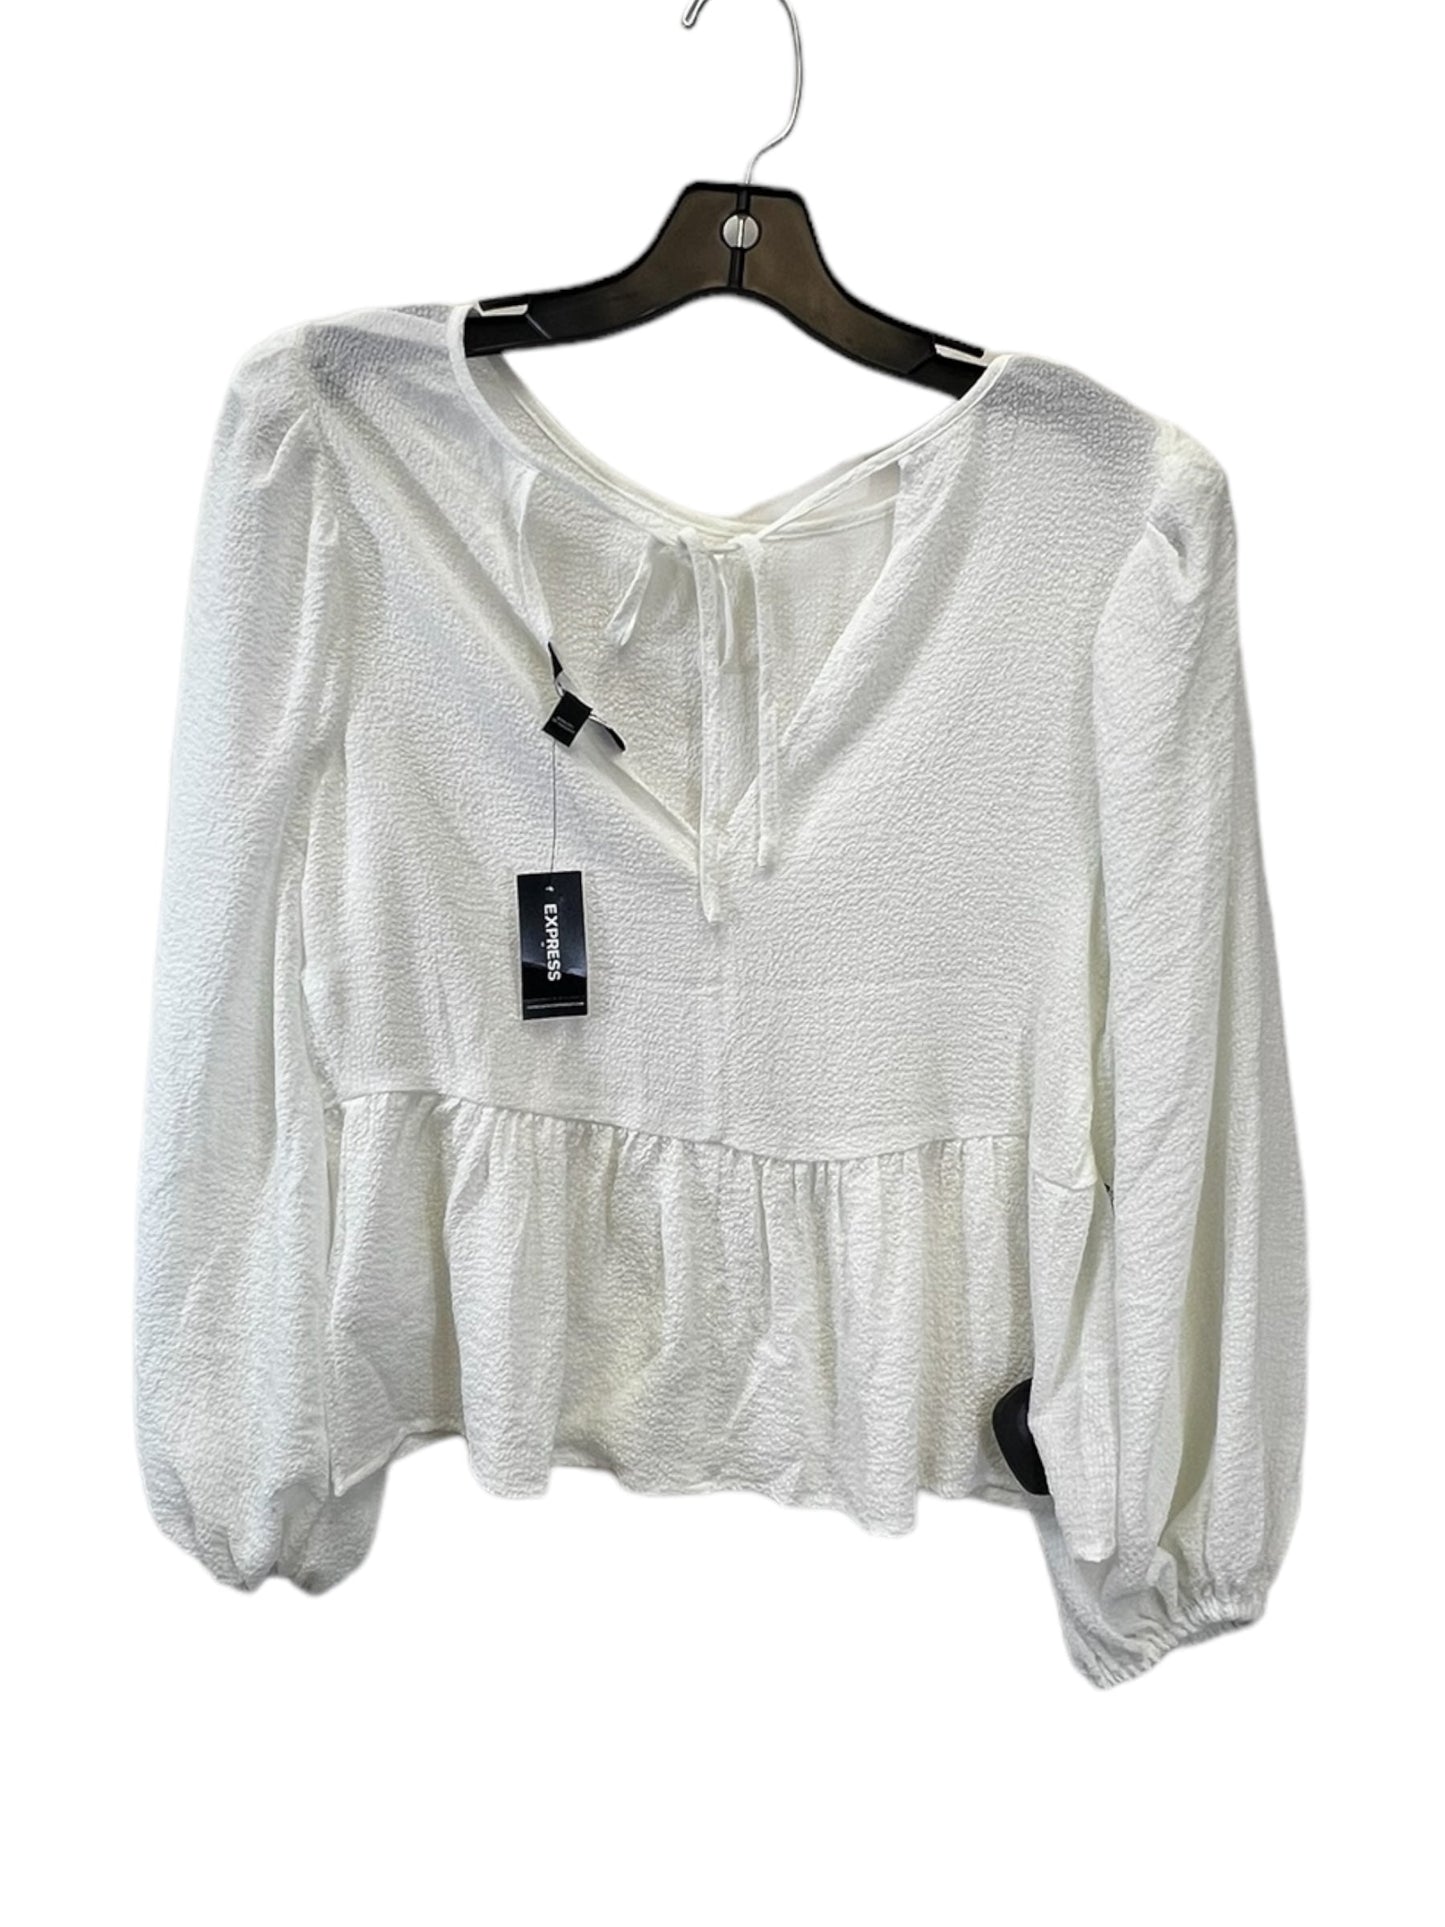 White Top Long Sleeve Express, Size Xs